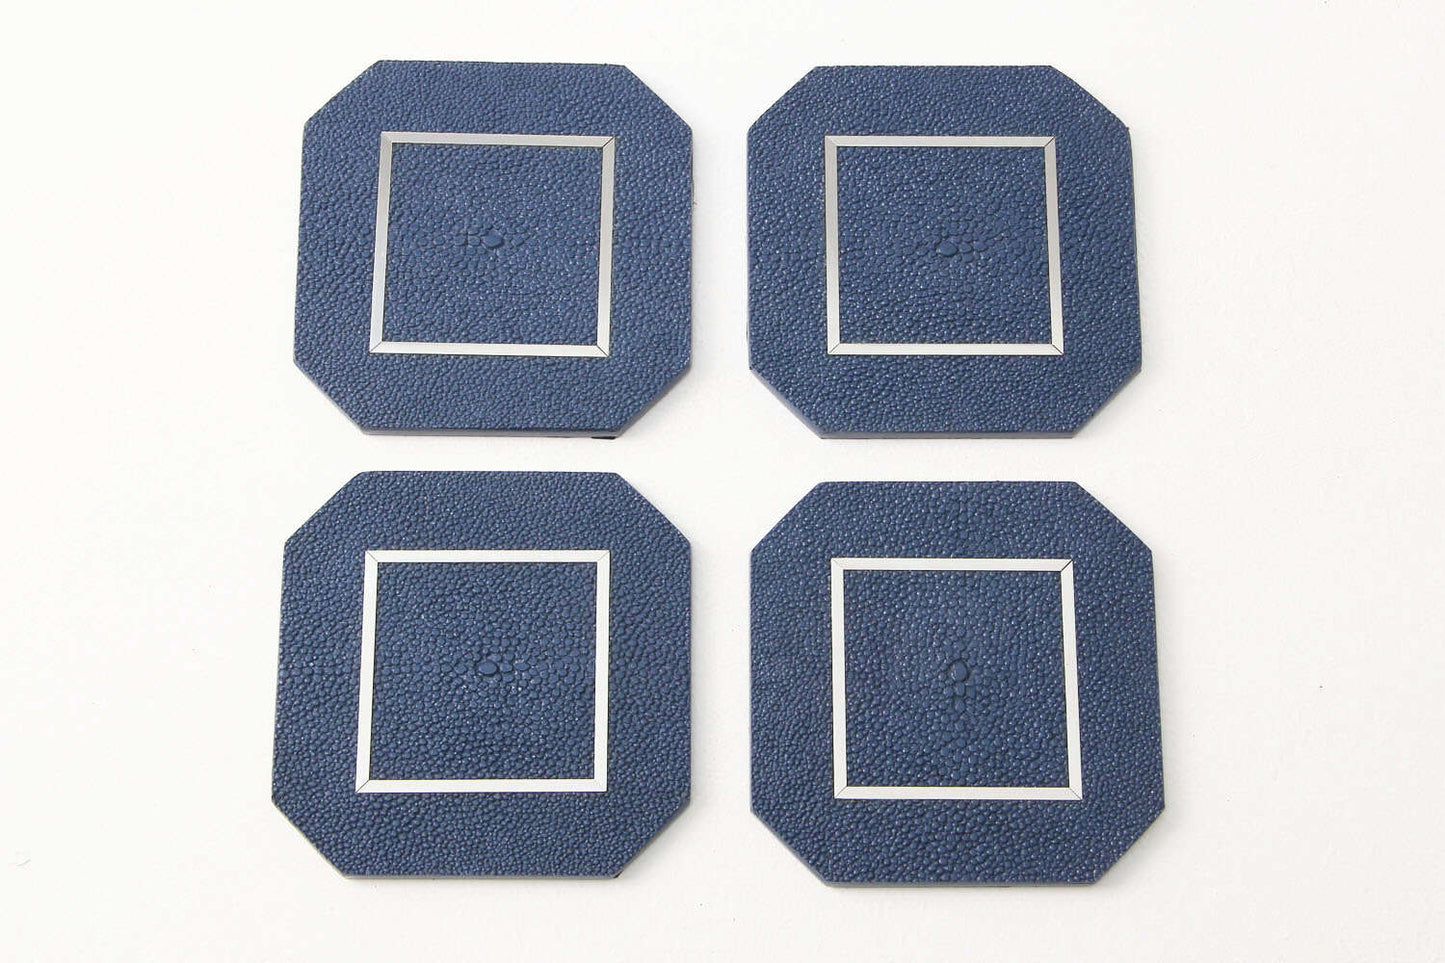 Nile Blue Drinks Coasters in Shagreen